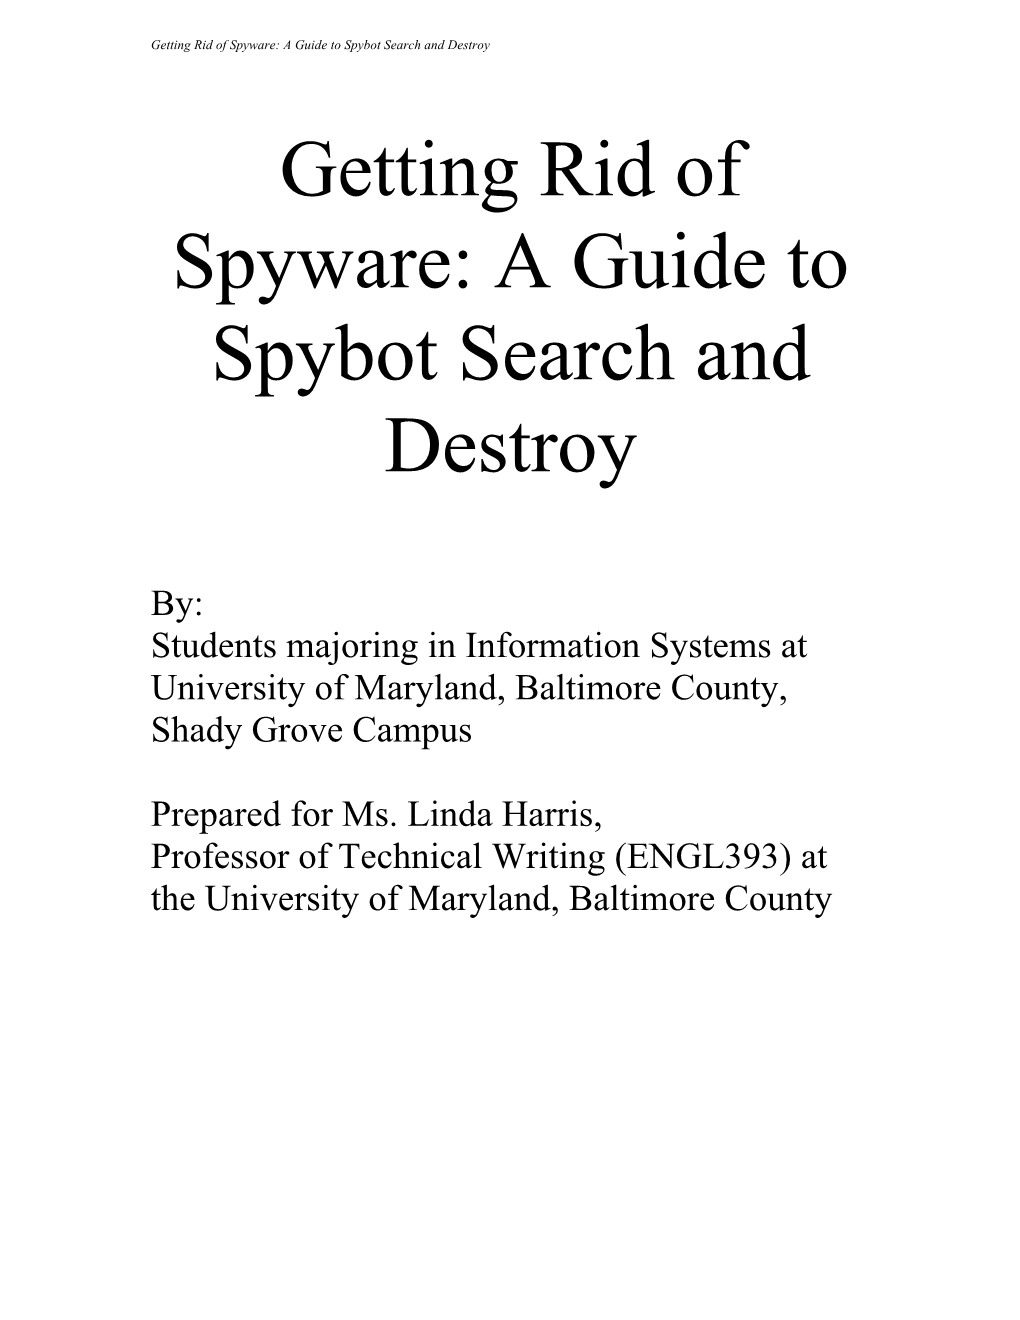 Getting Rid of Spyware: a Guide to Spybot Search and Destroy